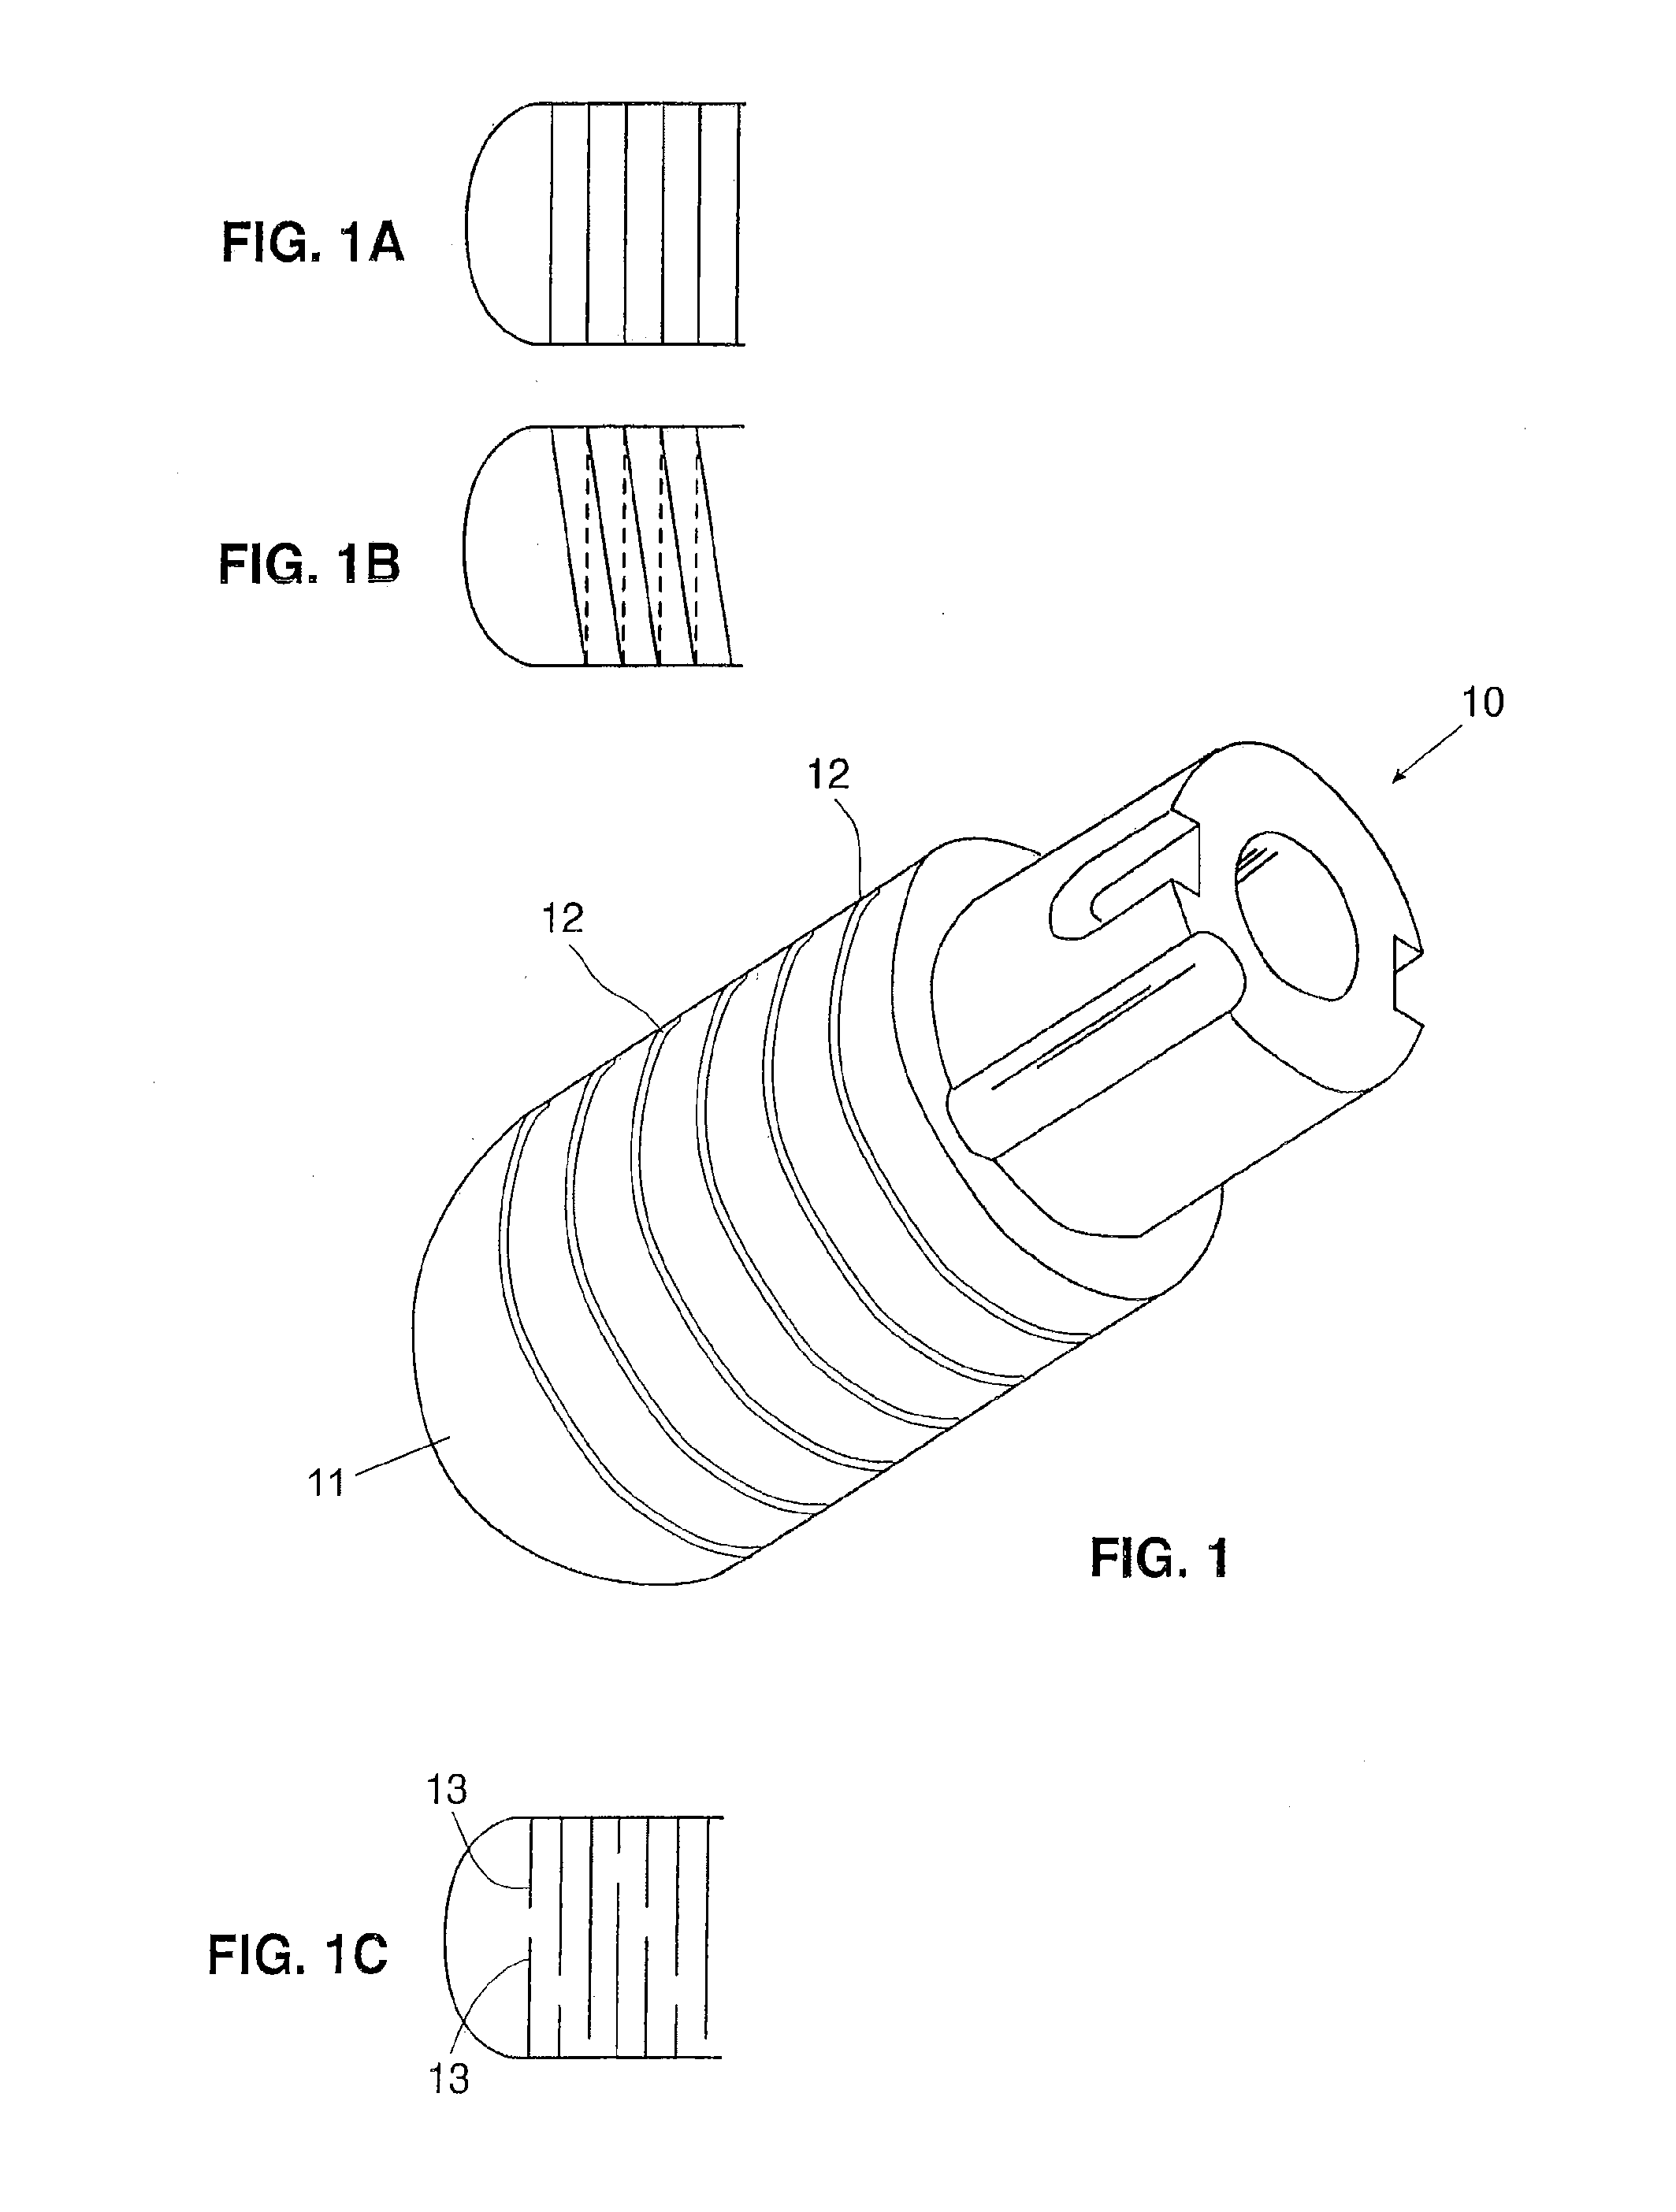 Kit for Non-Invasive Electrophysiology Procedures and Method of its Use